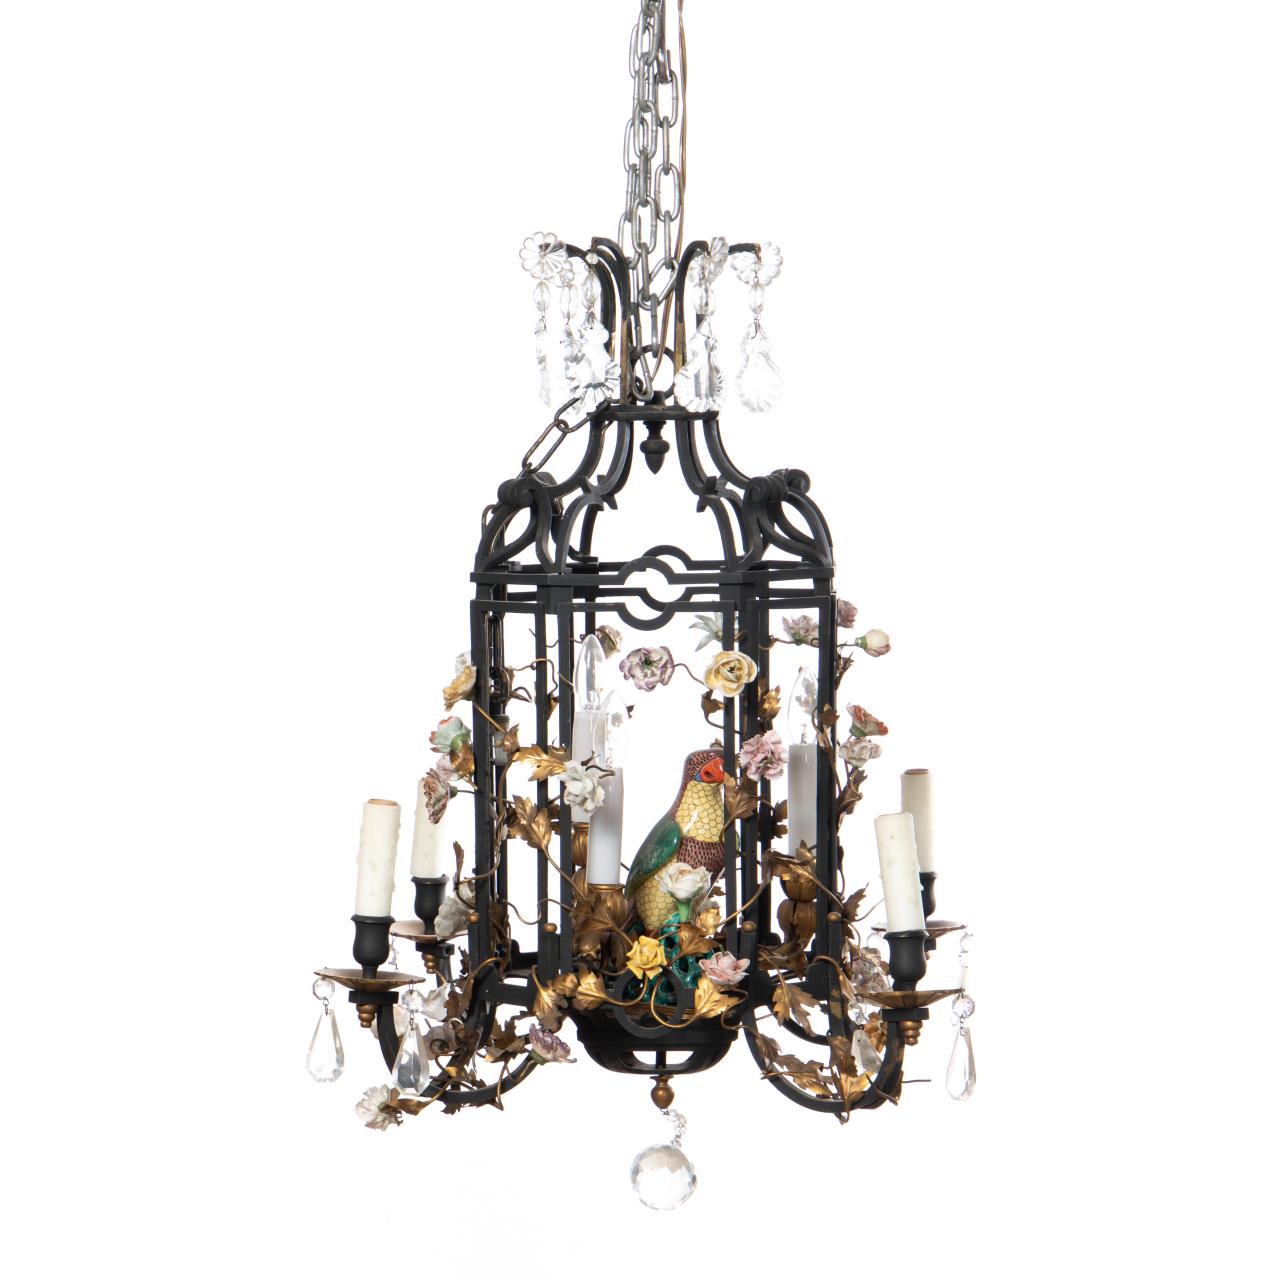 GARDEN FOLLY CHANDELIER WITH CHINESE 35c581